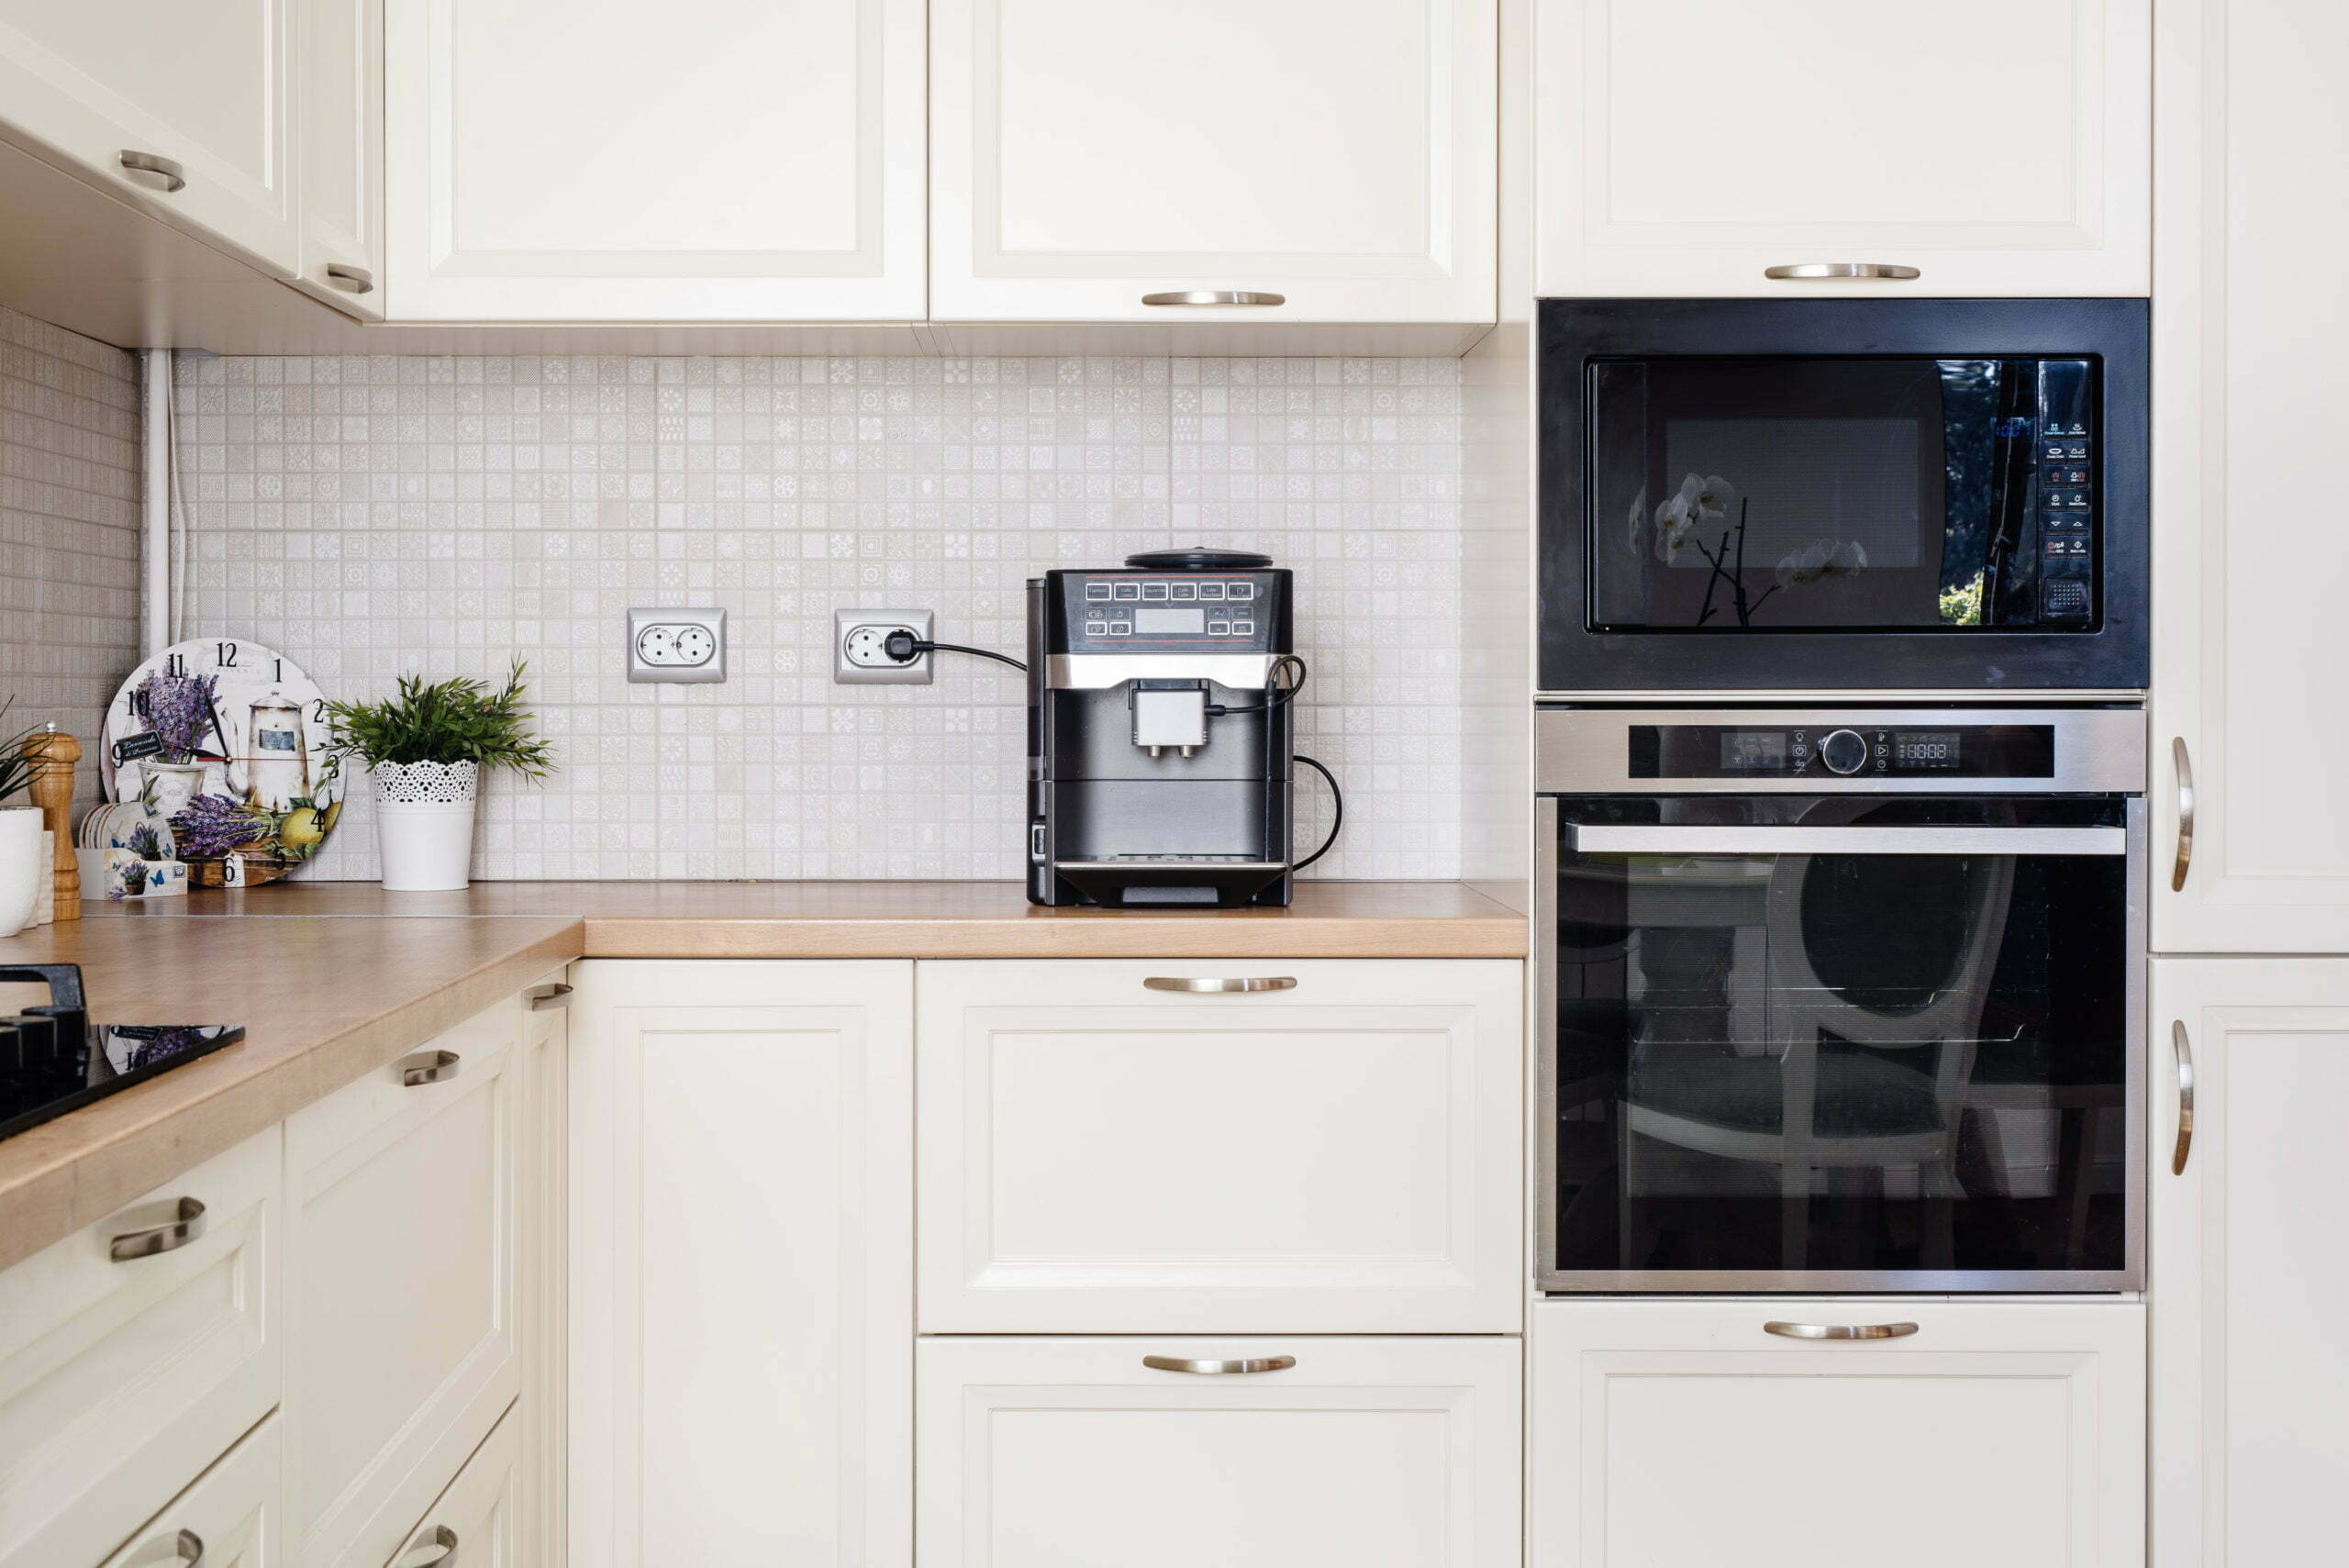 a microwave oven on a kitchen counter